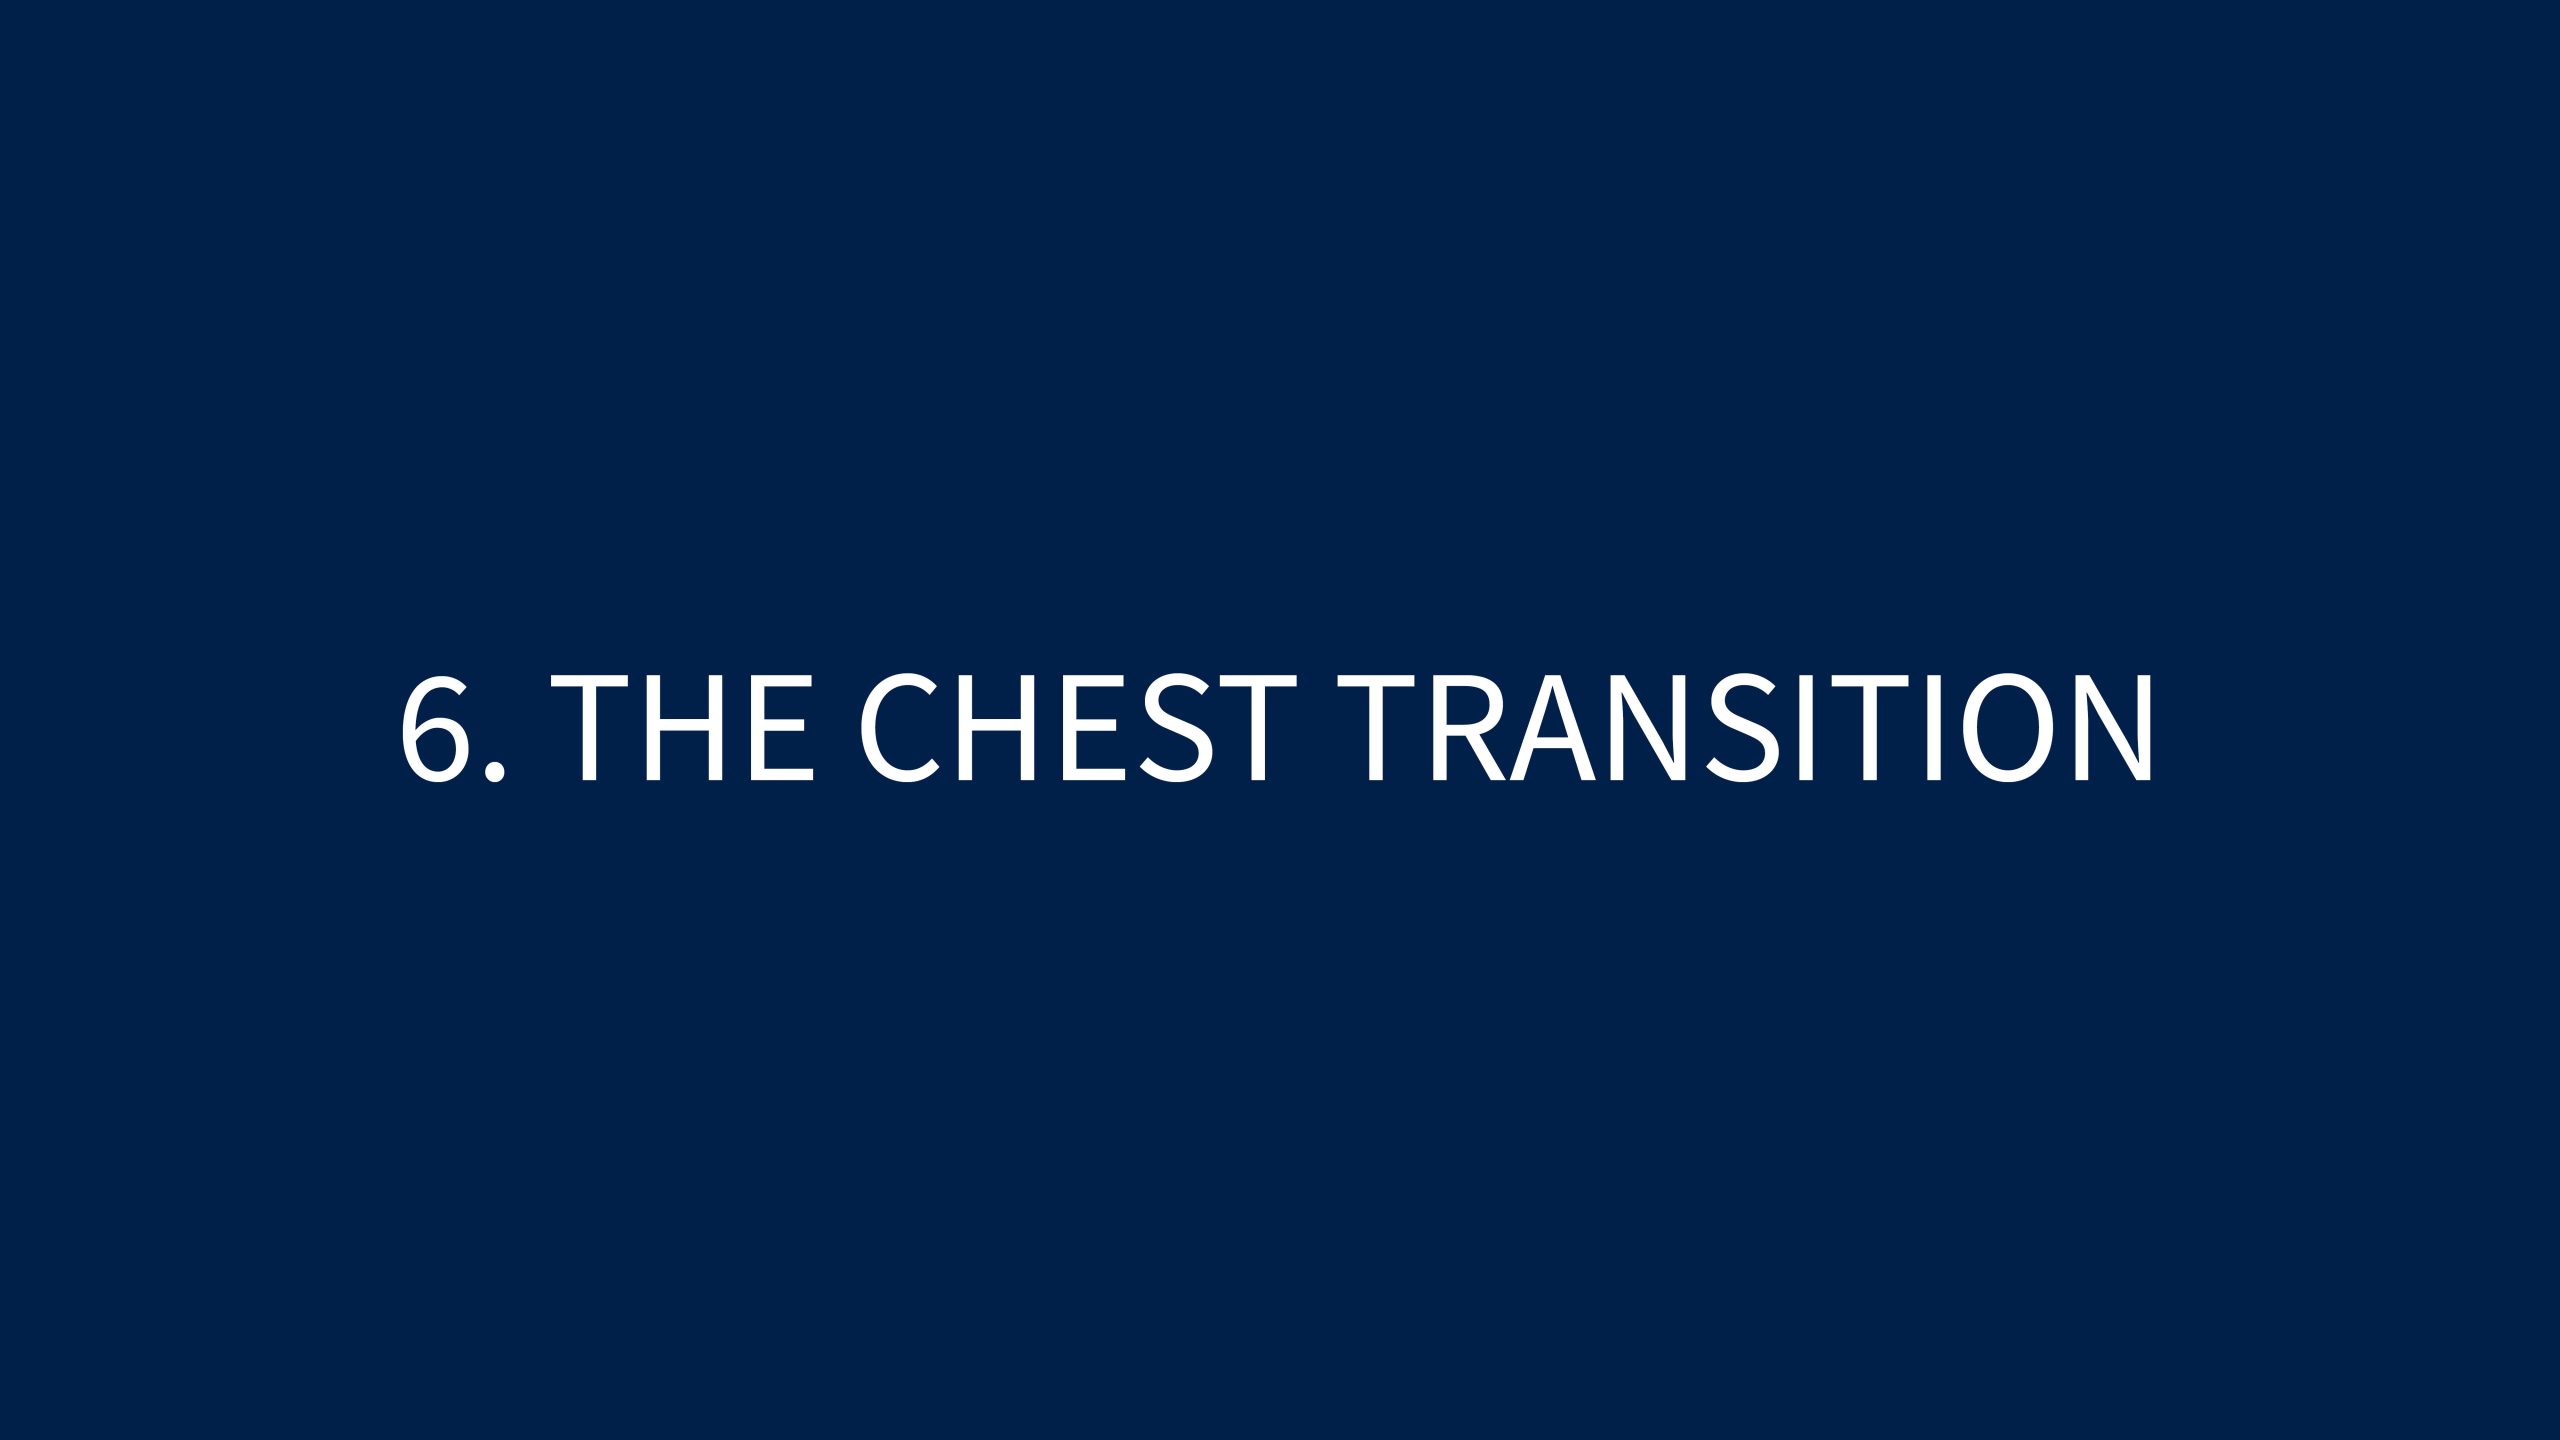 6 THE CHEST TRANSITION